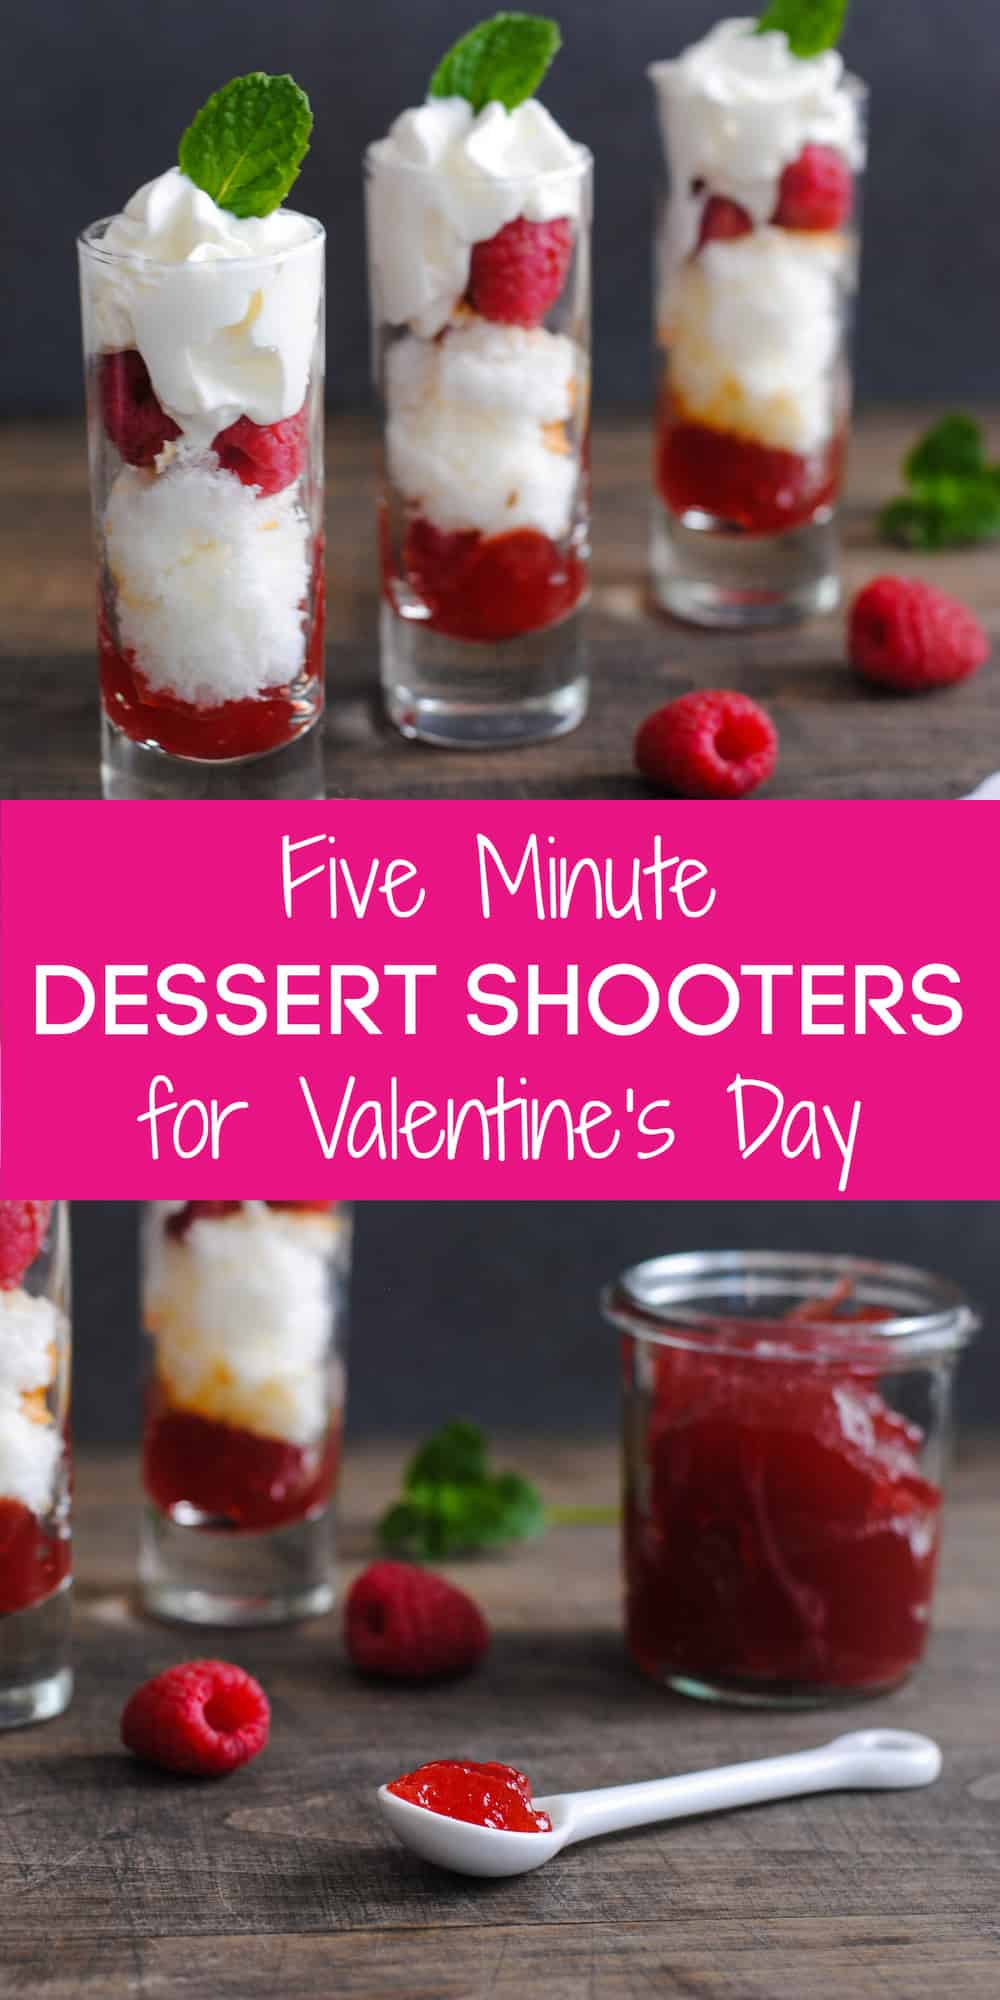 Collage of images of shooter glasses filled with a Valentine's Day dessert with overlay: Five Minute DESSERT SHOOTERS for Valentine's Day